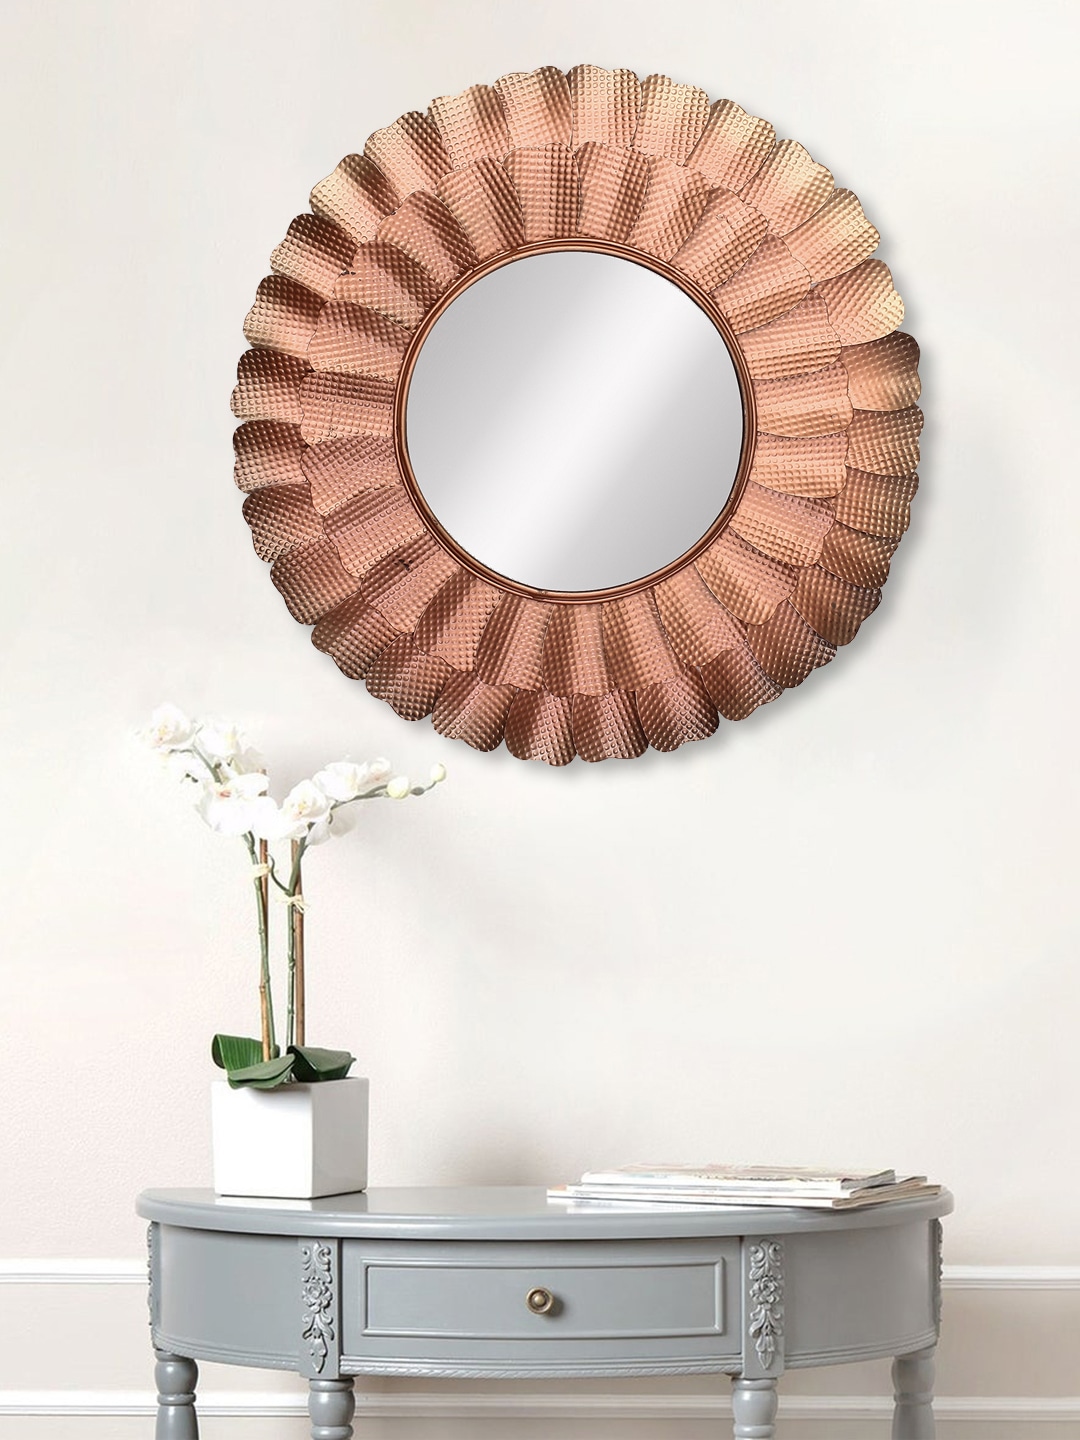 eCraftIndia Copper-Toned Metal Decorative Handcarved Wall Mirror Price in India